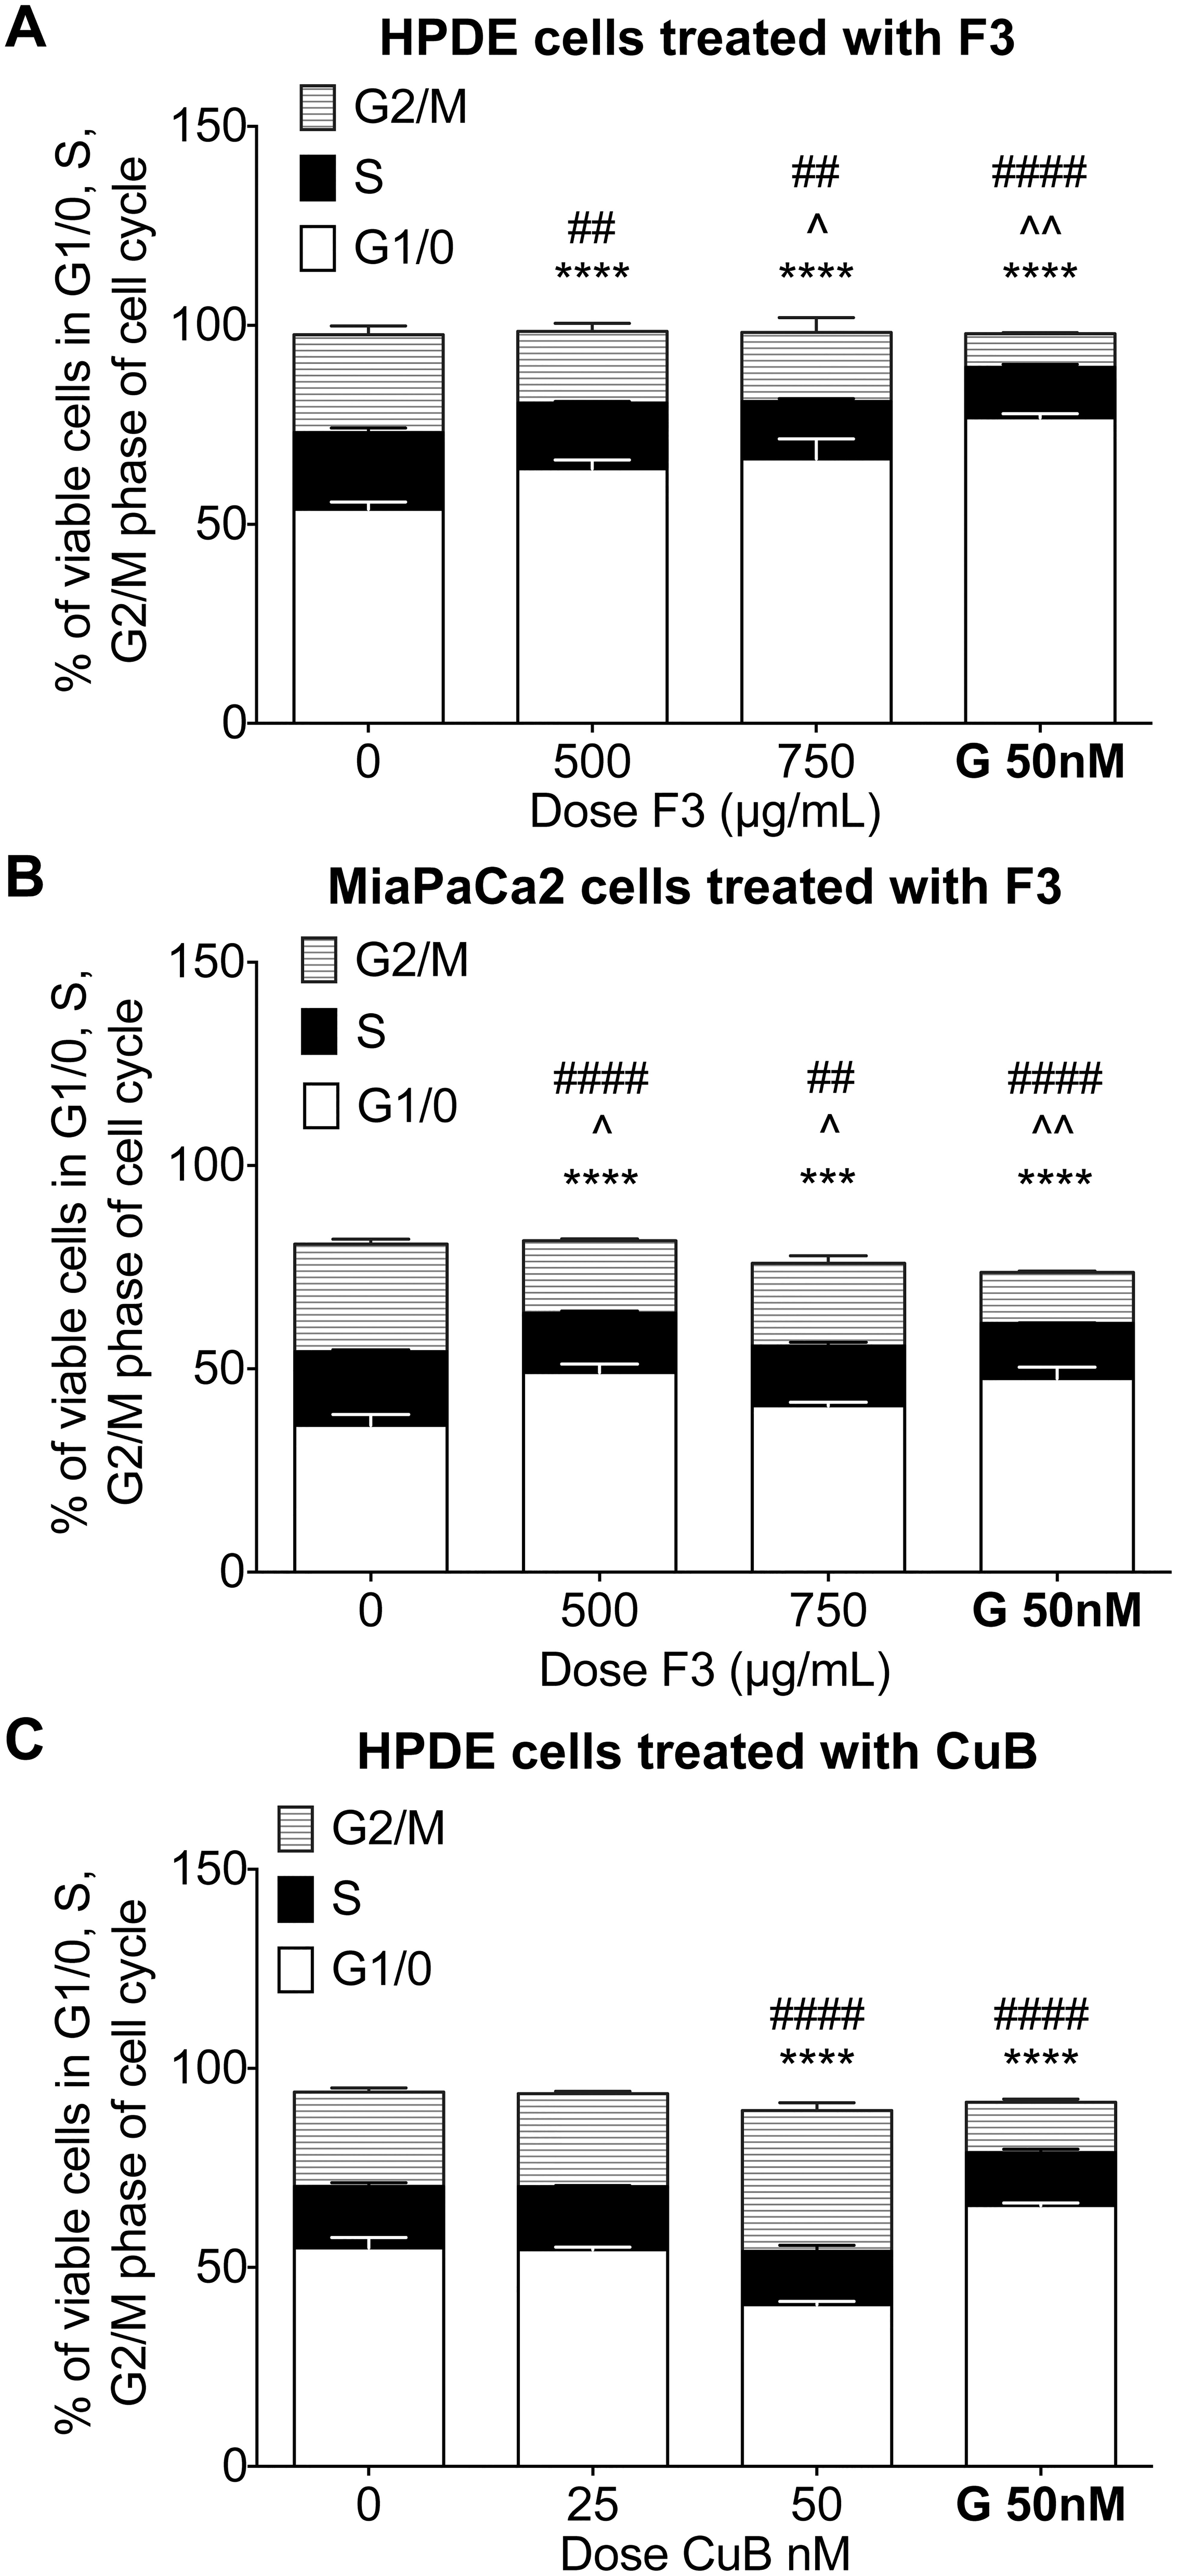 Cell cycle analysis of HPDE and MiaPaCa2 Cells treated with F3 (0–750 µg/mL) and CuB (0–50 nM) for 48-hours as determined using Muse™ Cell Cycle Kit.